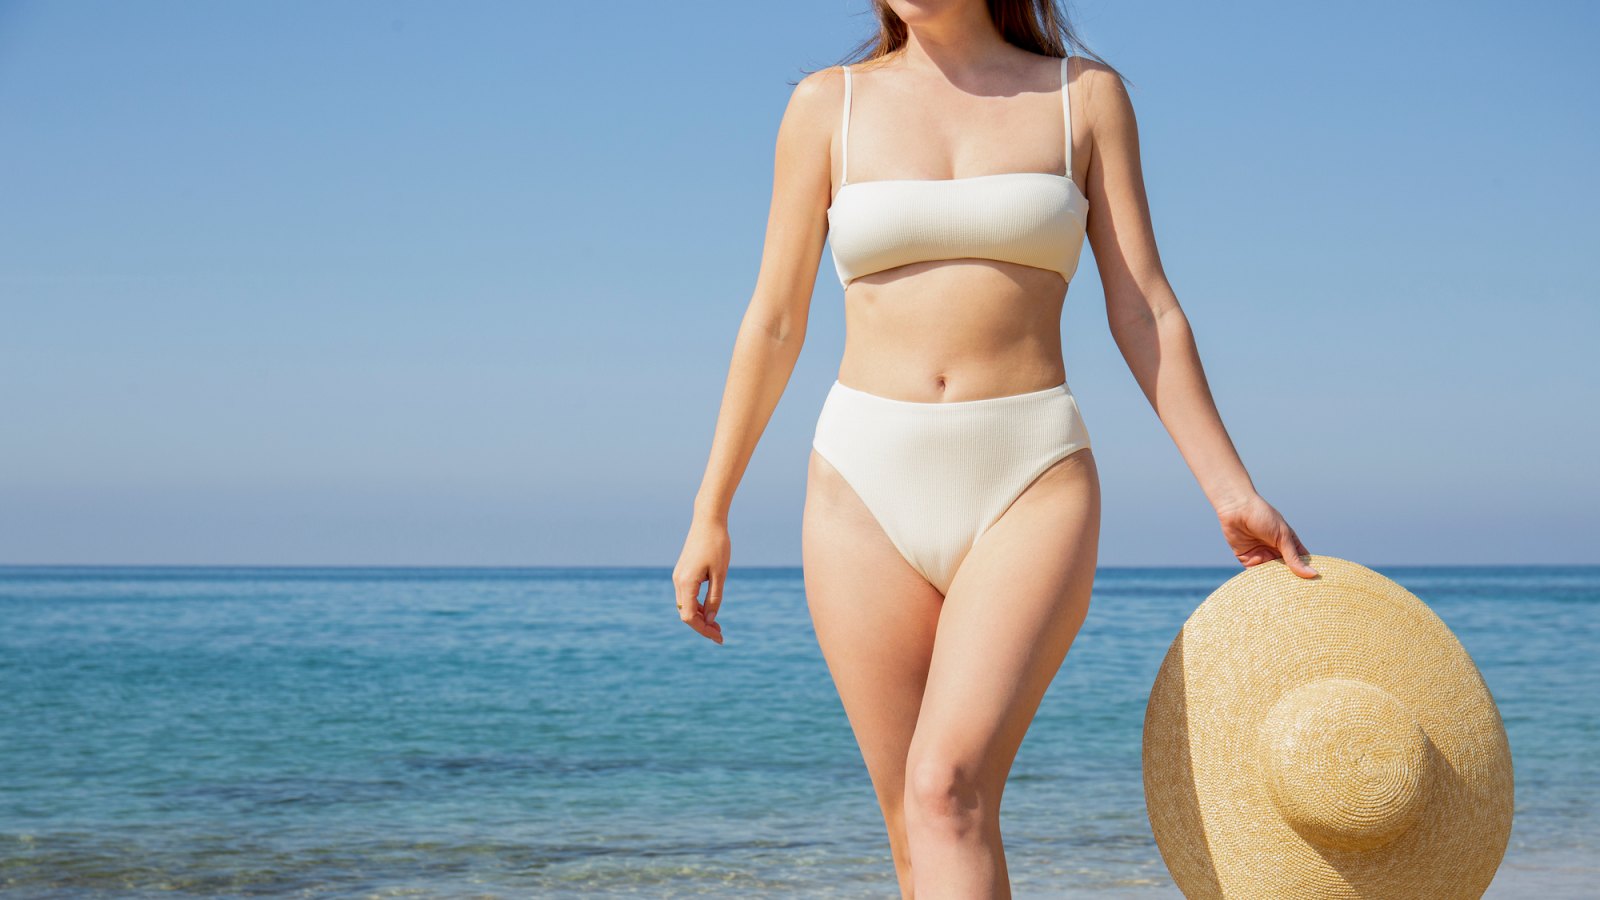 11 Swimsuits That'll Accentuate Your Curves in the Best Way